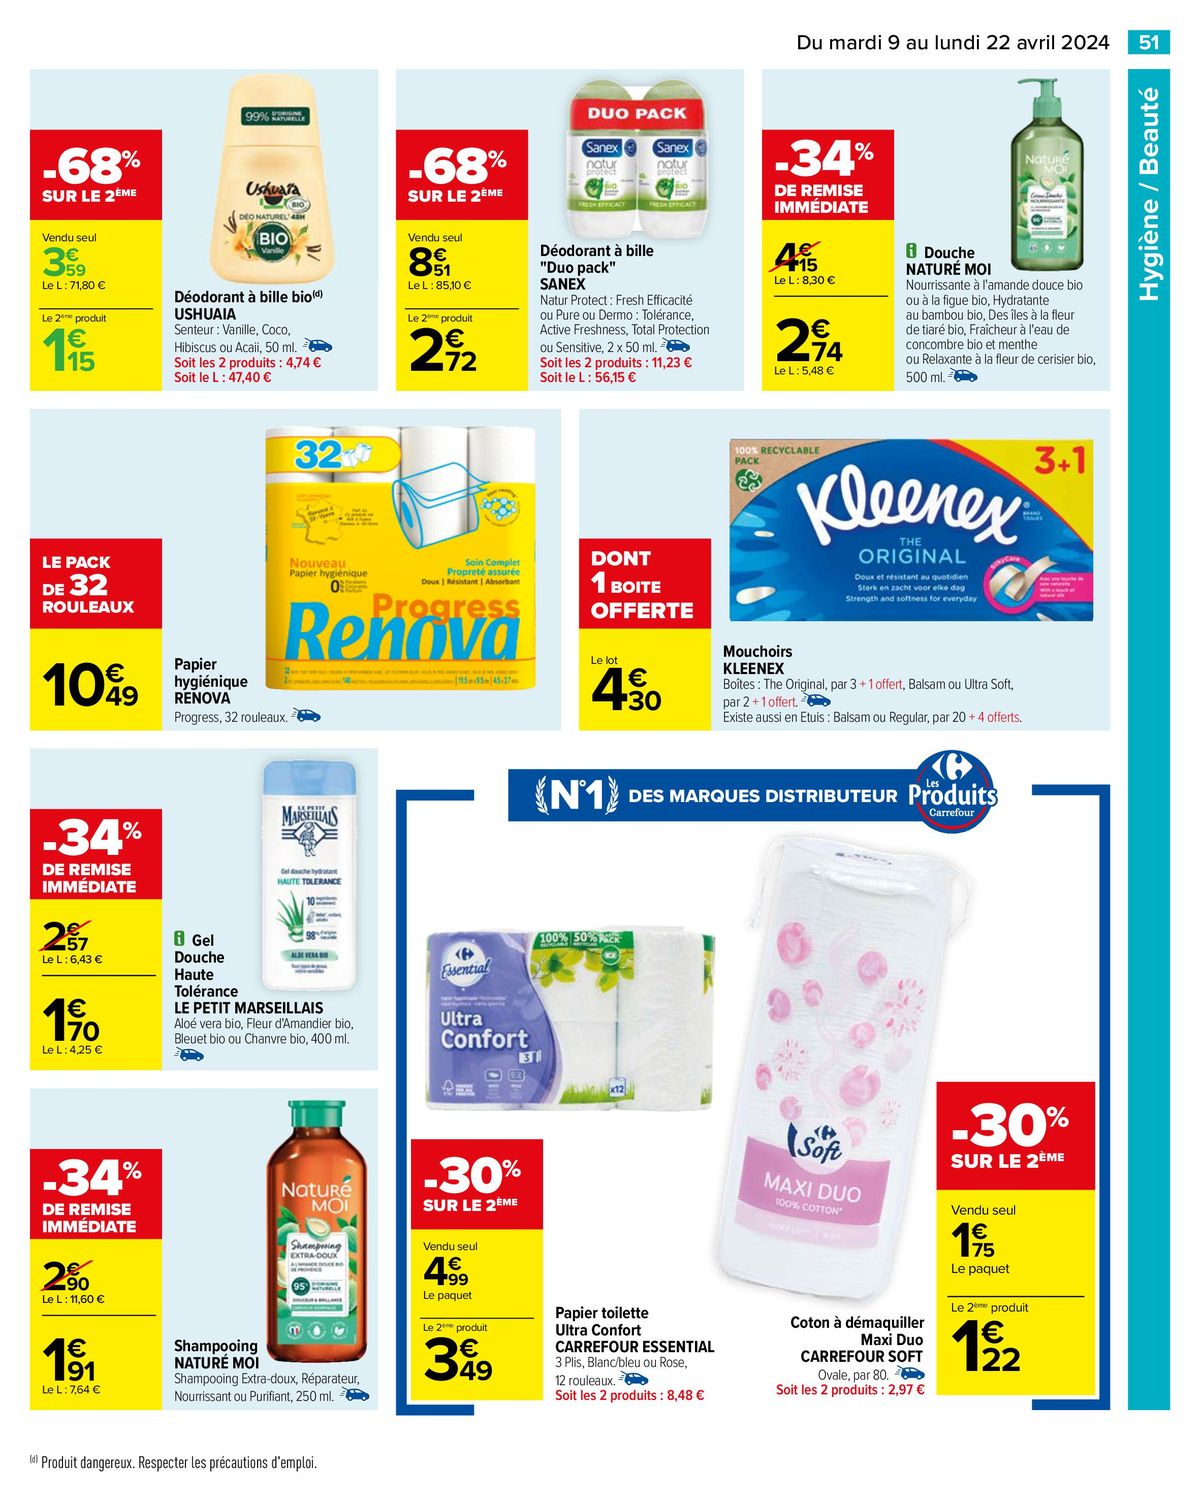 Catalogue OFFERT Carrefour Drive , page 00053